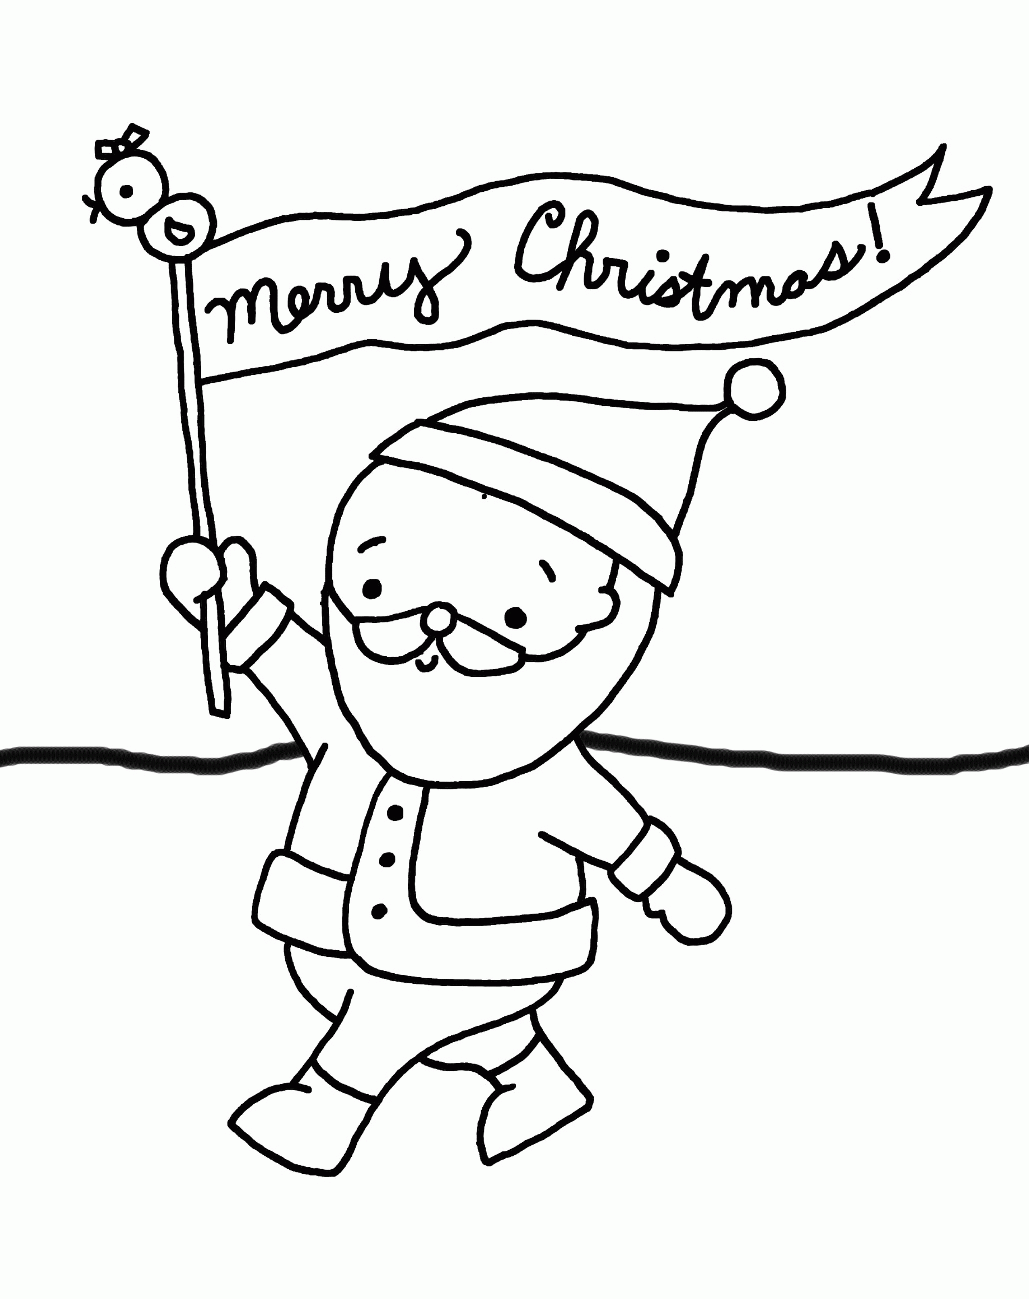 Santa Say Merry Christmas Coloring Pages For Kids | Christmas ...